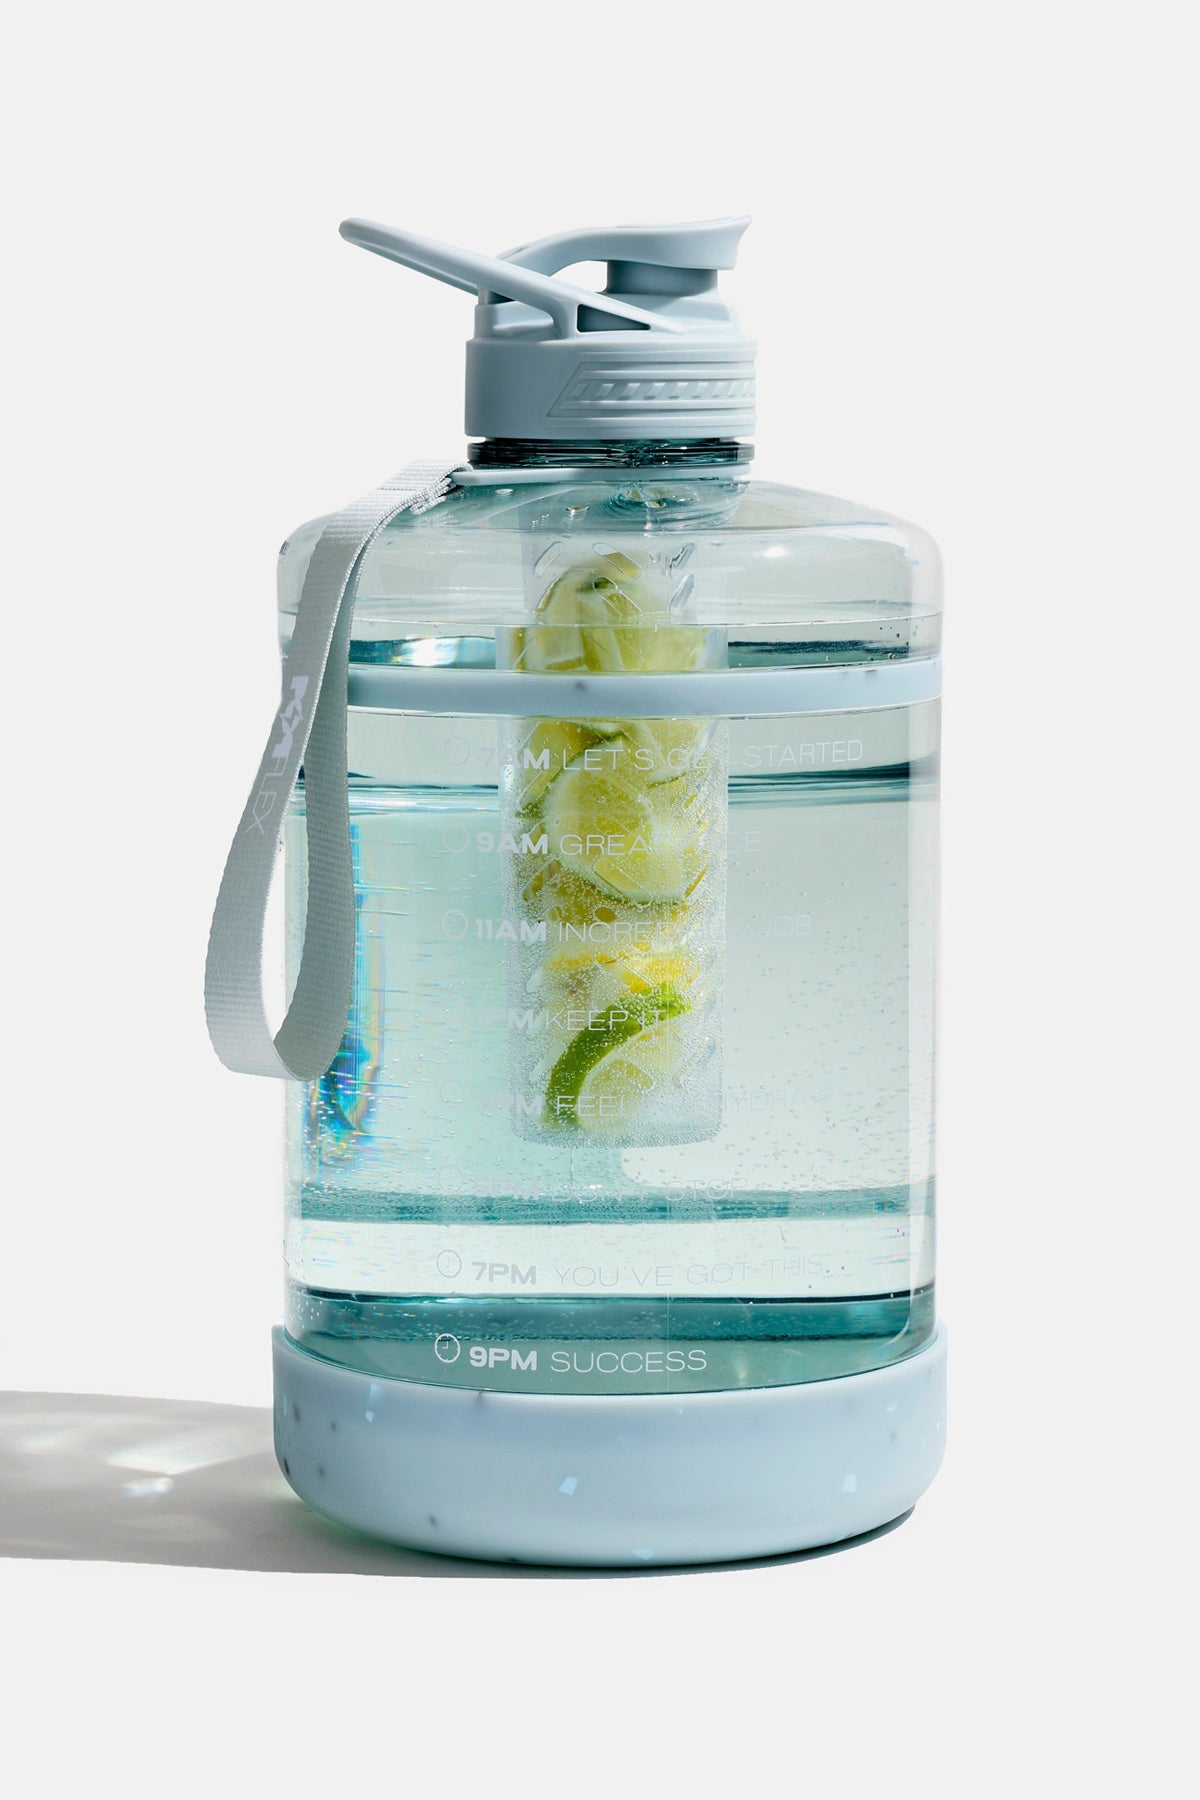 https://cdn.shopify.com/s/files/1/1089/2102/products/BF-PF-Gallon-WaterBottle-Blue-With-Fruit_5be80a64-3d91-406e-b586-485923f3486a.jpg?v=1664373654&width=1200